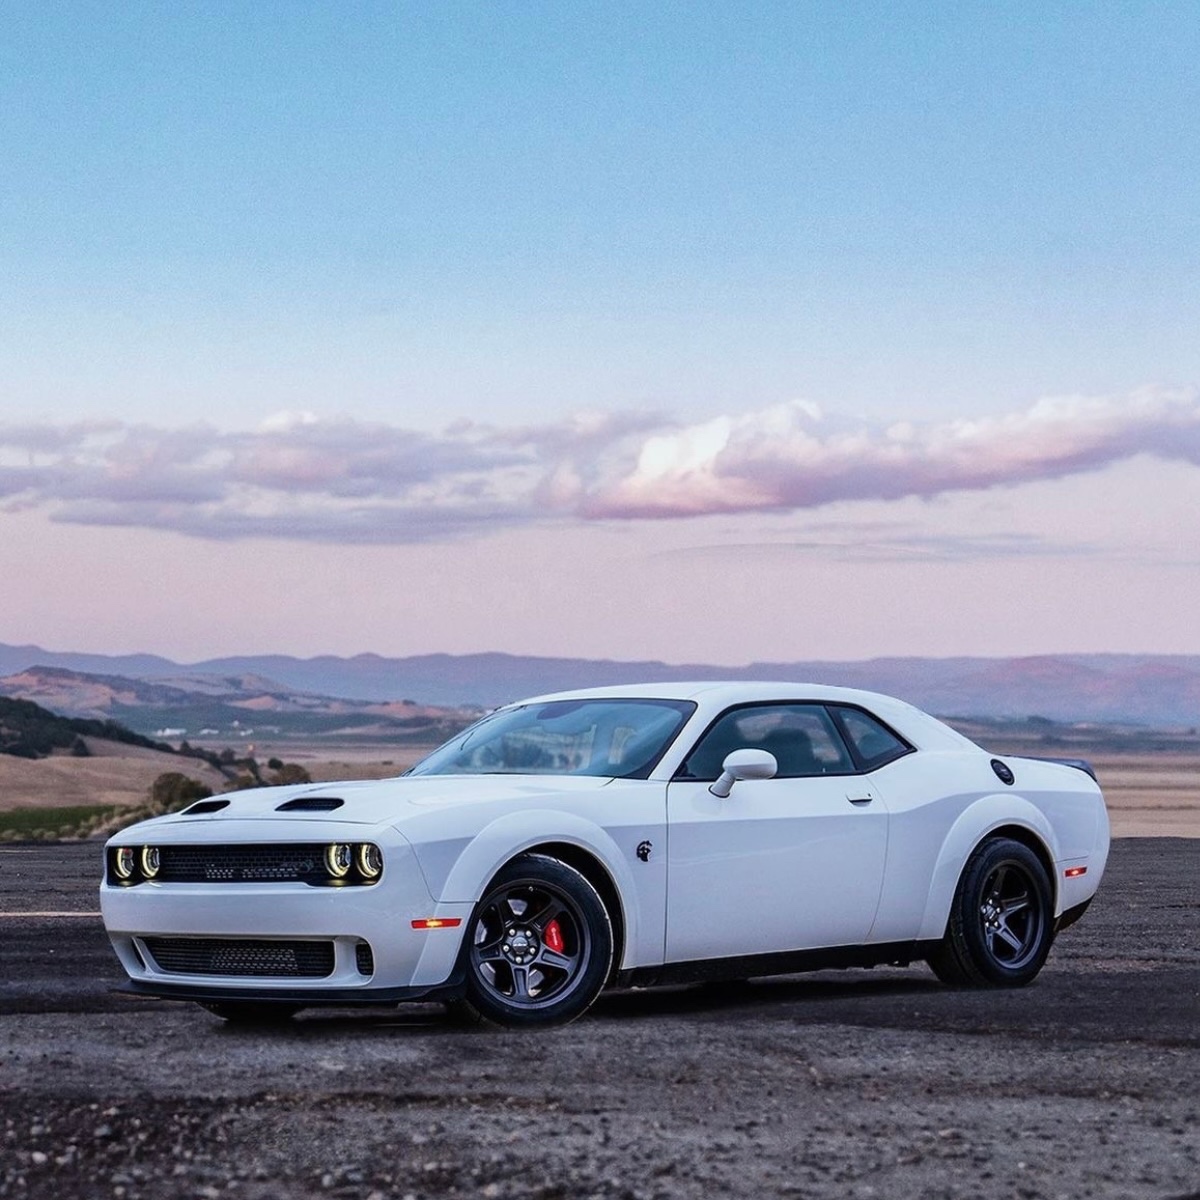 Sleek lines, powerful performance – the #DodgeChallenger is your ticket to a driving experience like no other. 😮‍💨👏 Swing by today and start your new journeys with the power and style of your new ride! 🏁💨 #CarCrushWednesday #Dodge #DodgeUSA